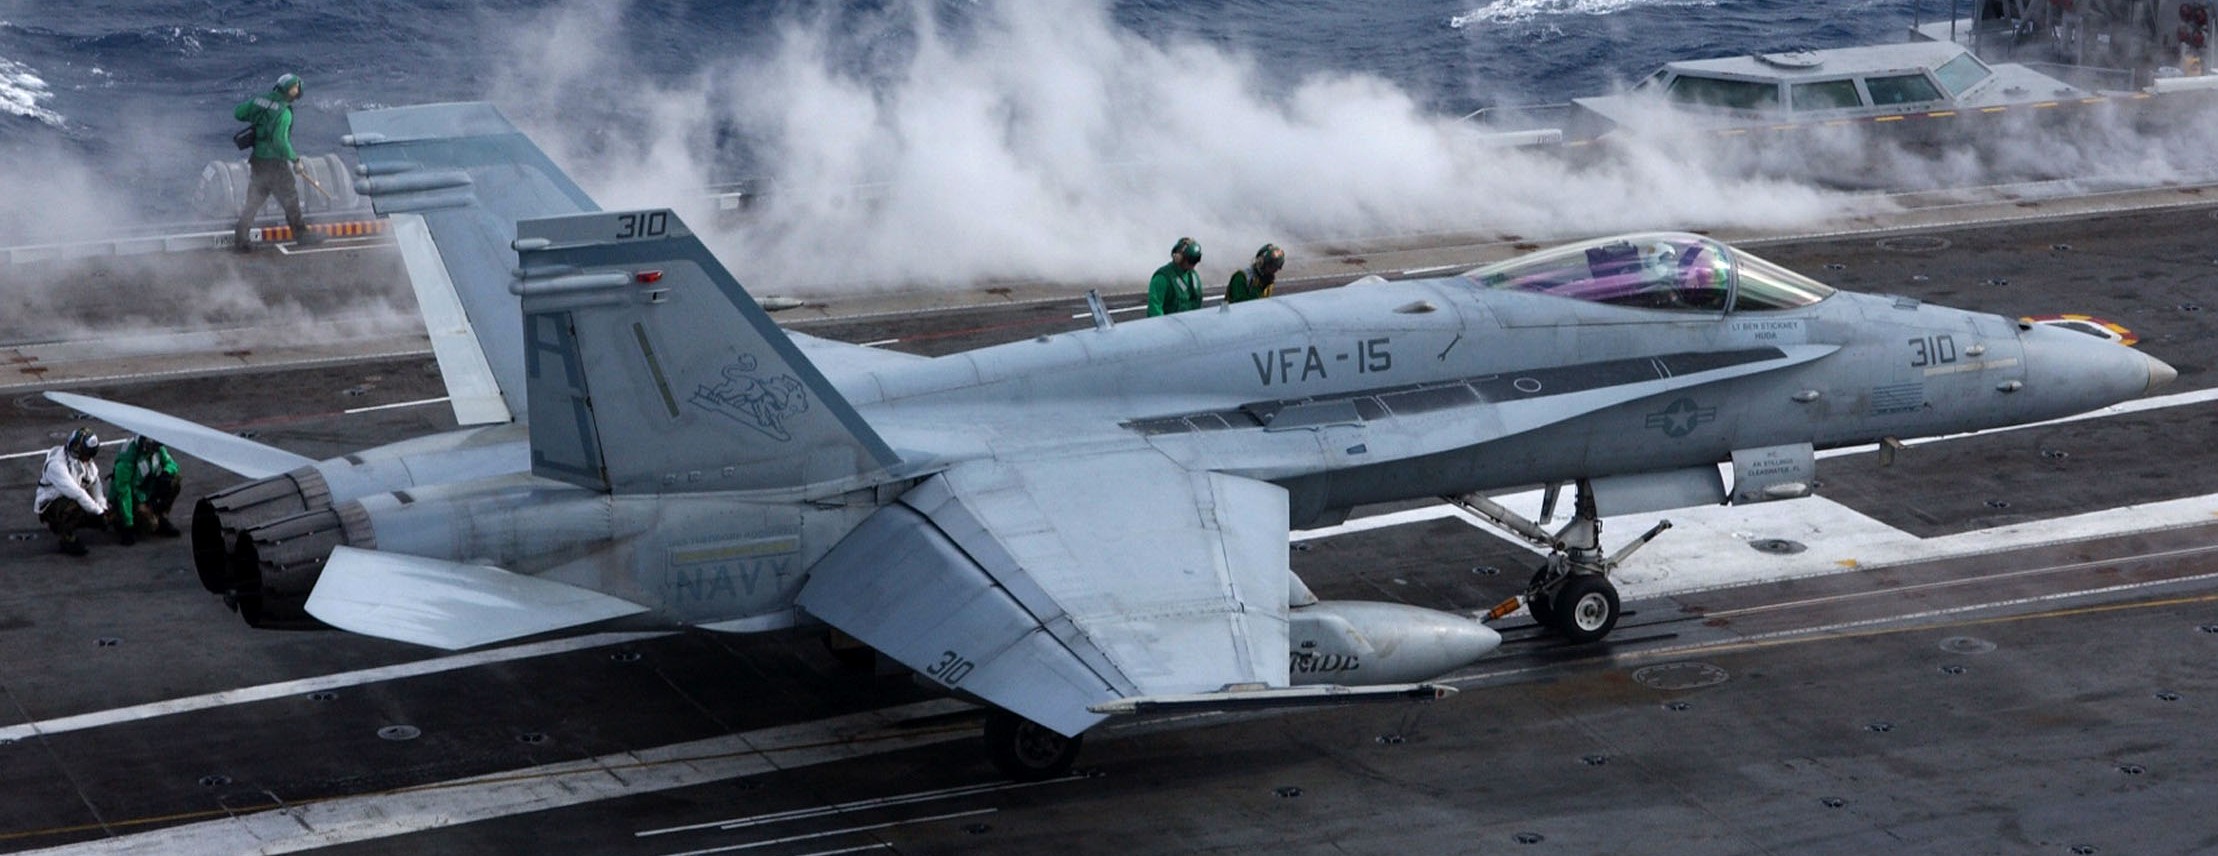 vfa-15 valions strike fighter squadron f/a-18c hornet cvn-71 uss theodore roosevelt cvw-8 us navy 89p